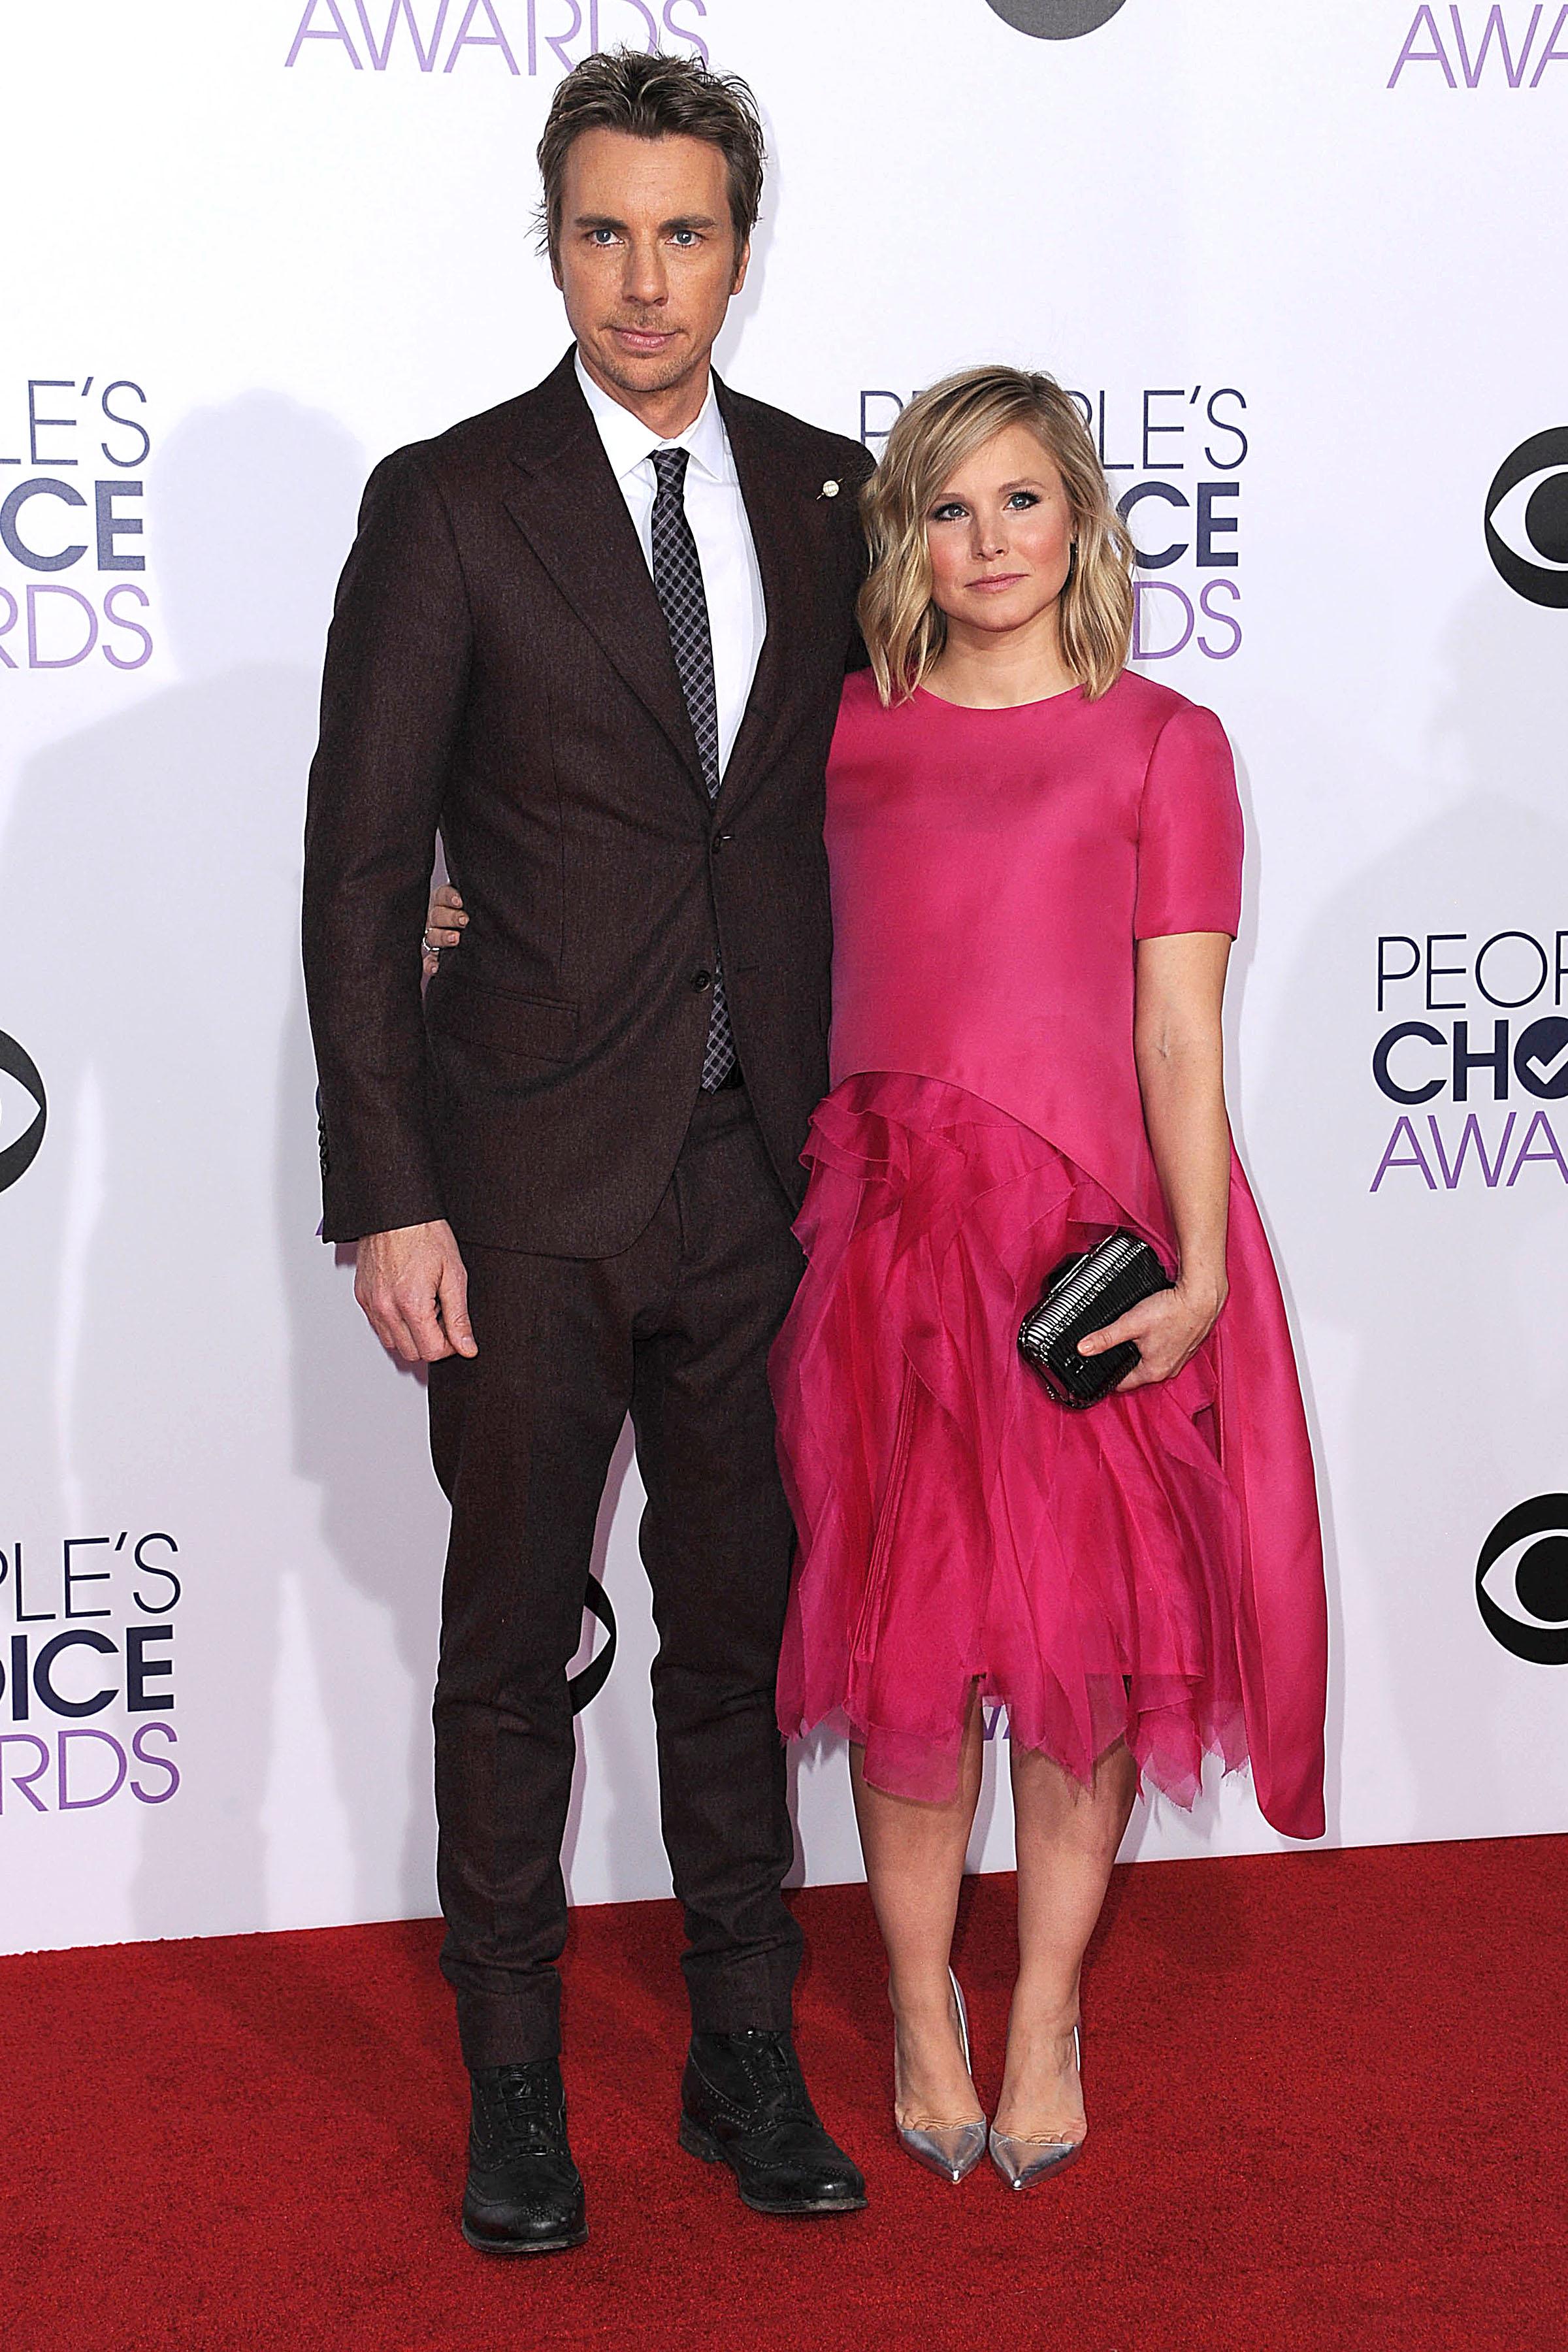 Celebrities at the 2015 Peoples Choice Awards in Los Angeles